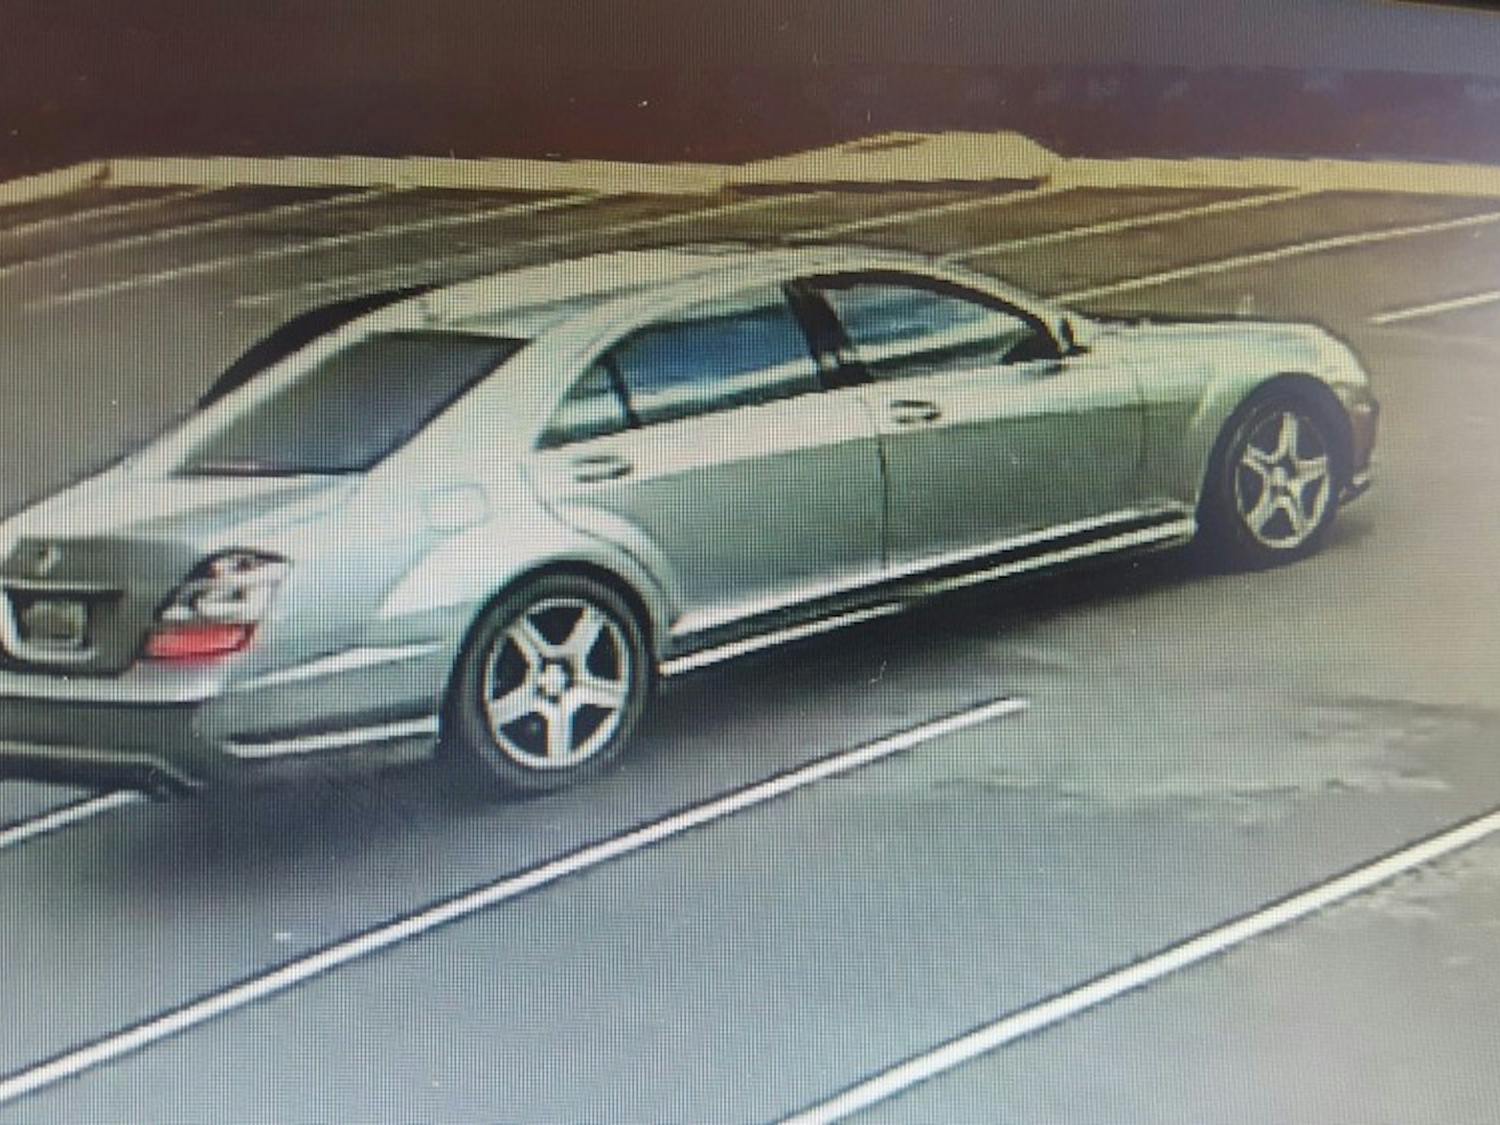 The silver Mercedes police say was used in the&nbsp;Jan. 11, 2018 robbery of Troy Bank & Trust in Opelika, Ala.